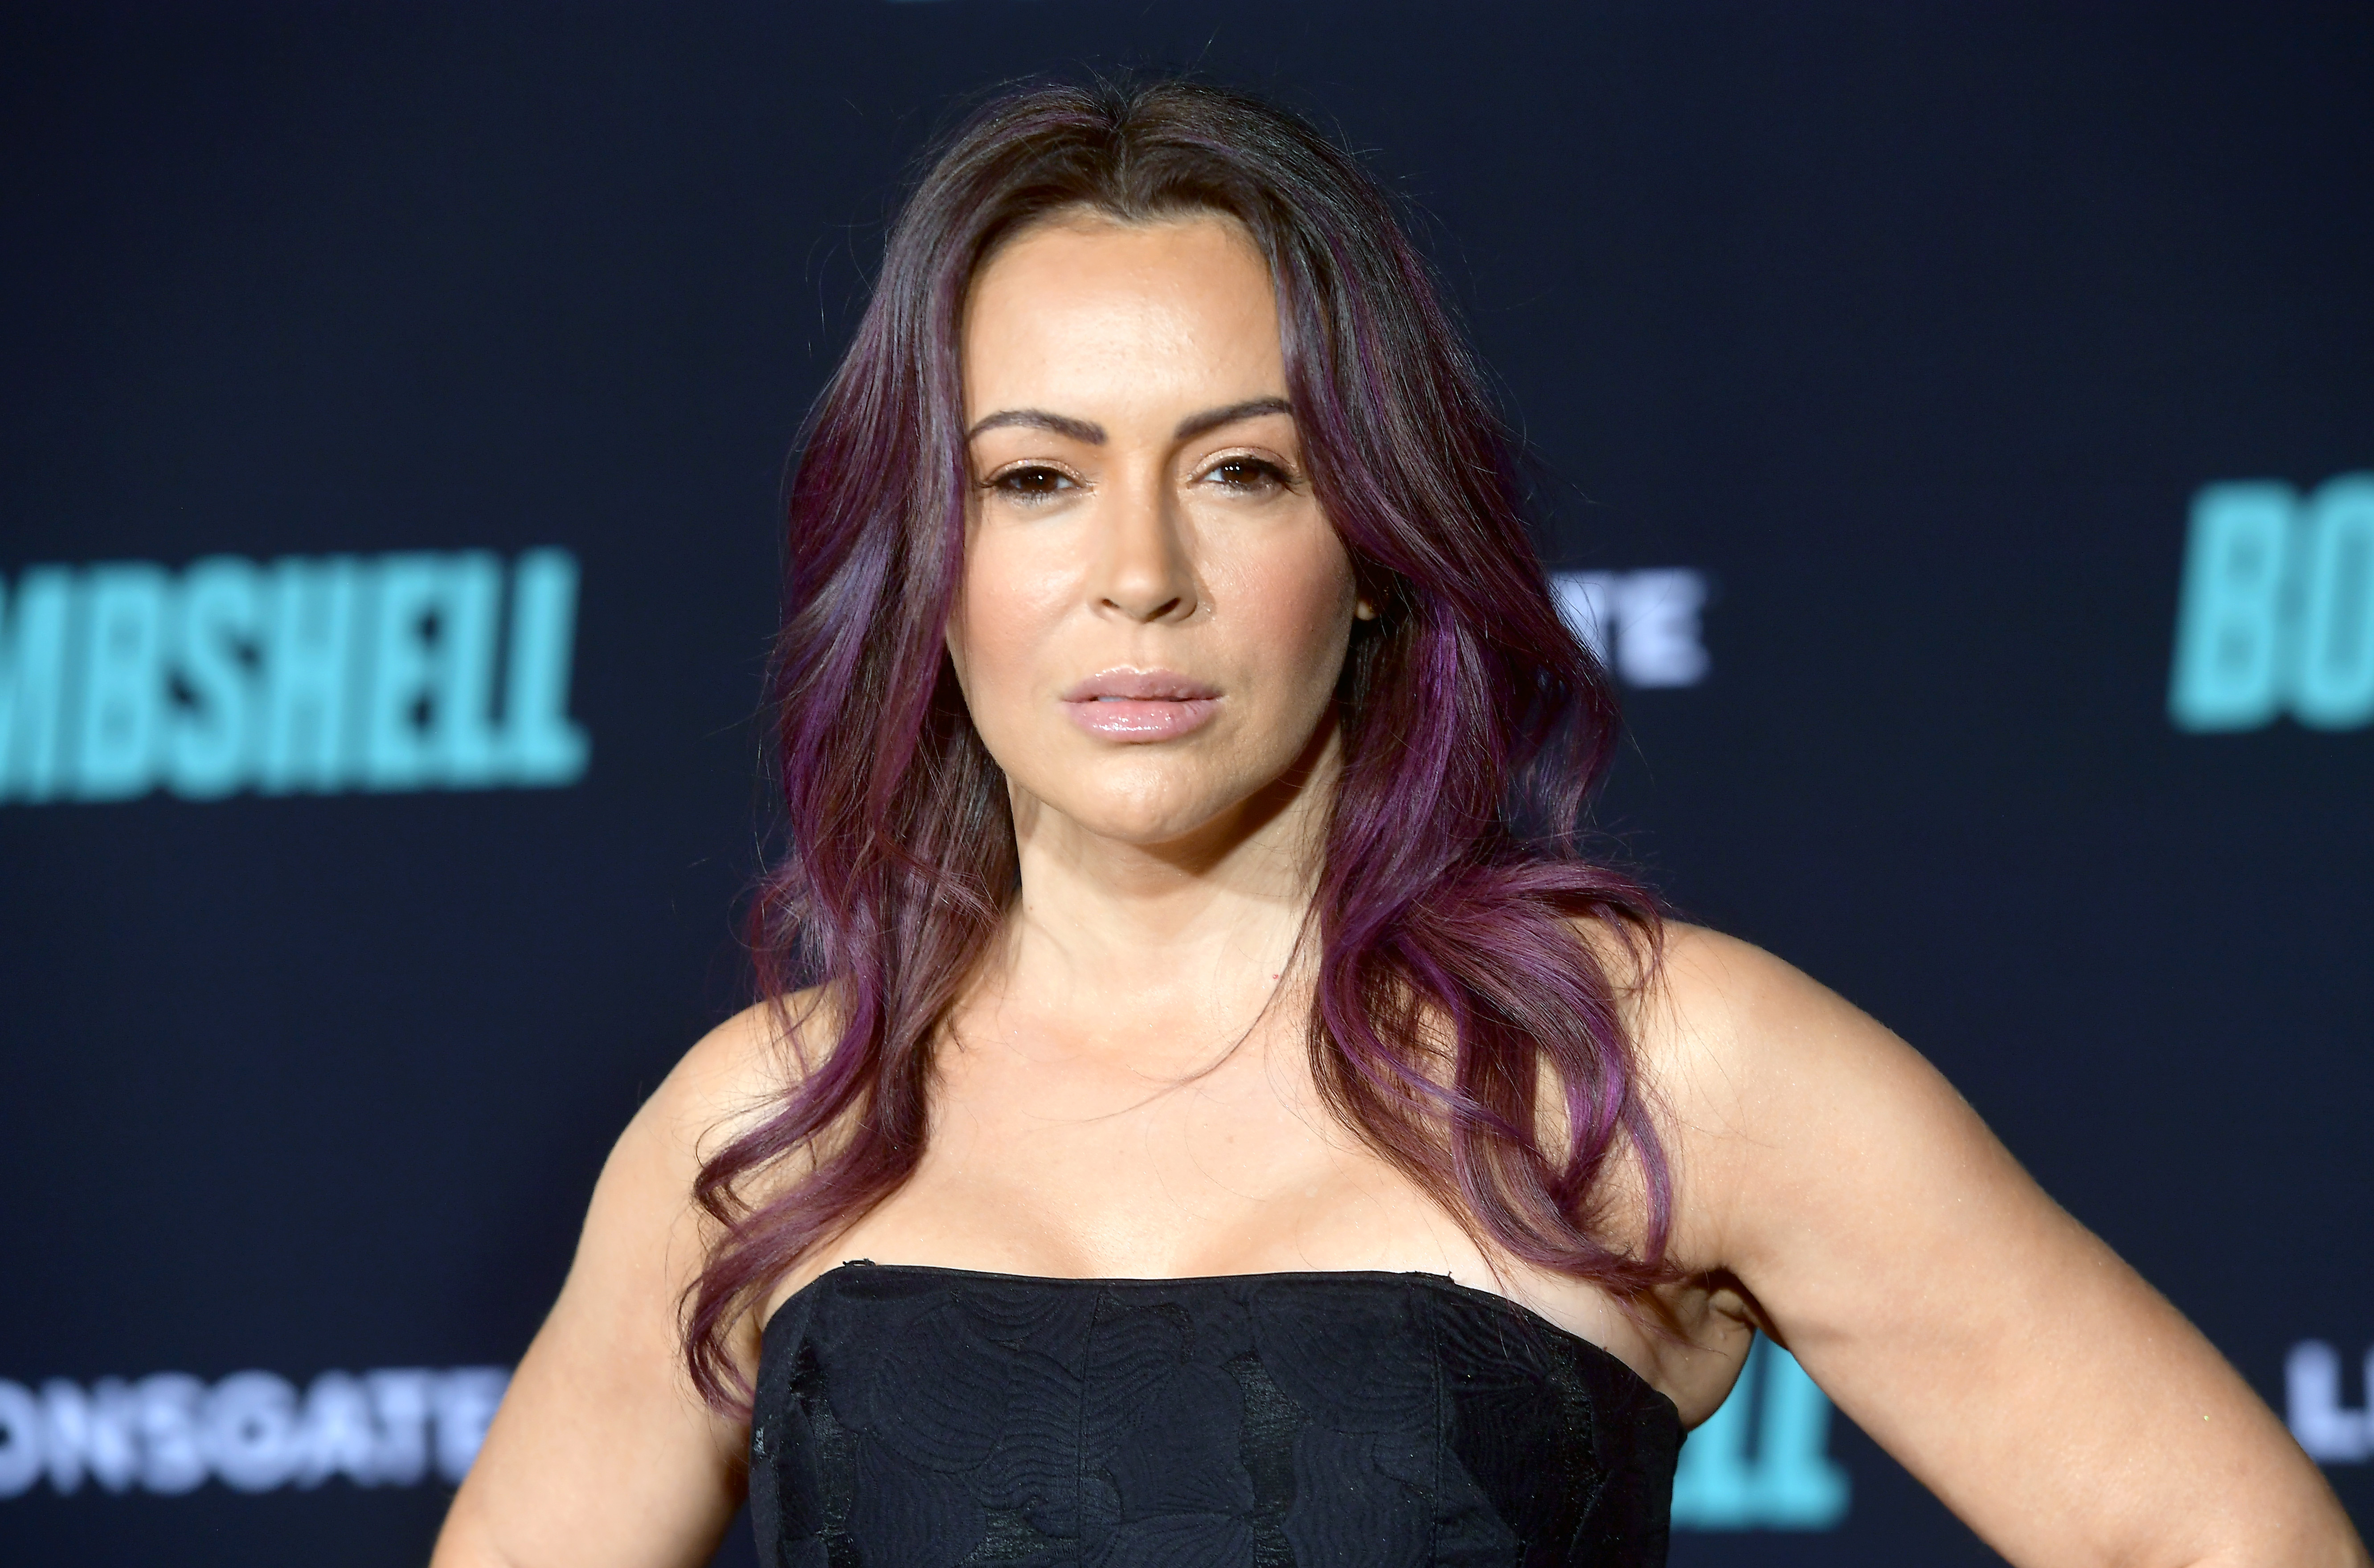 Alyssa Milano attends a Special Screening of Liongate's "Bombshell" in Westwood, California, on December 10, 2019. | Source: Getty Images